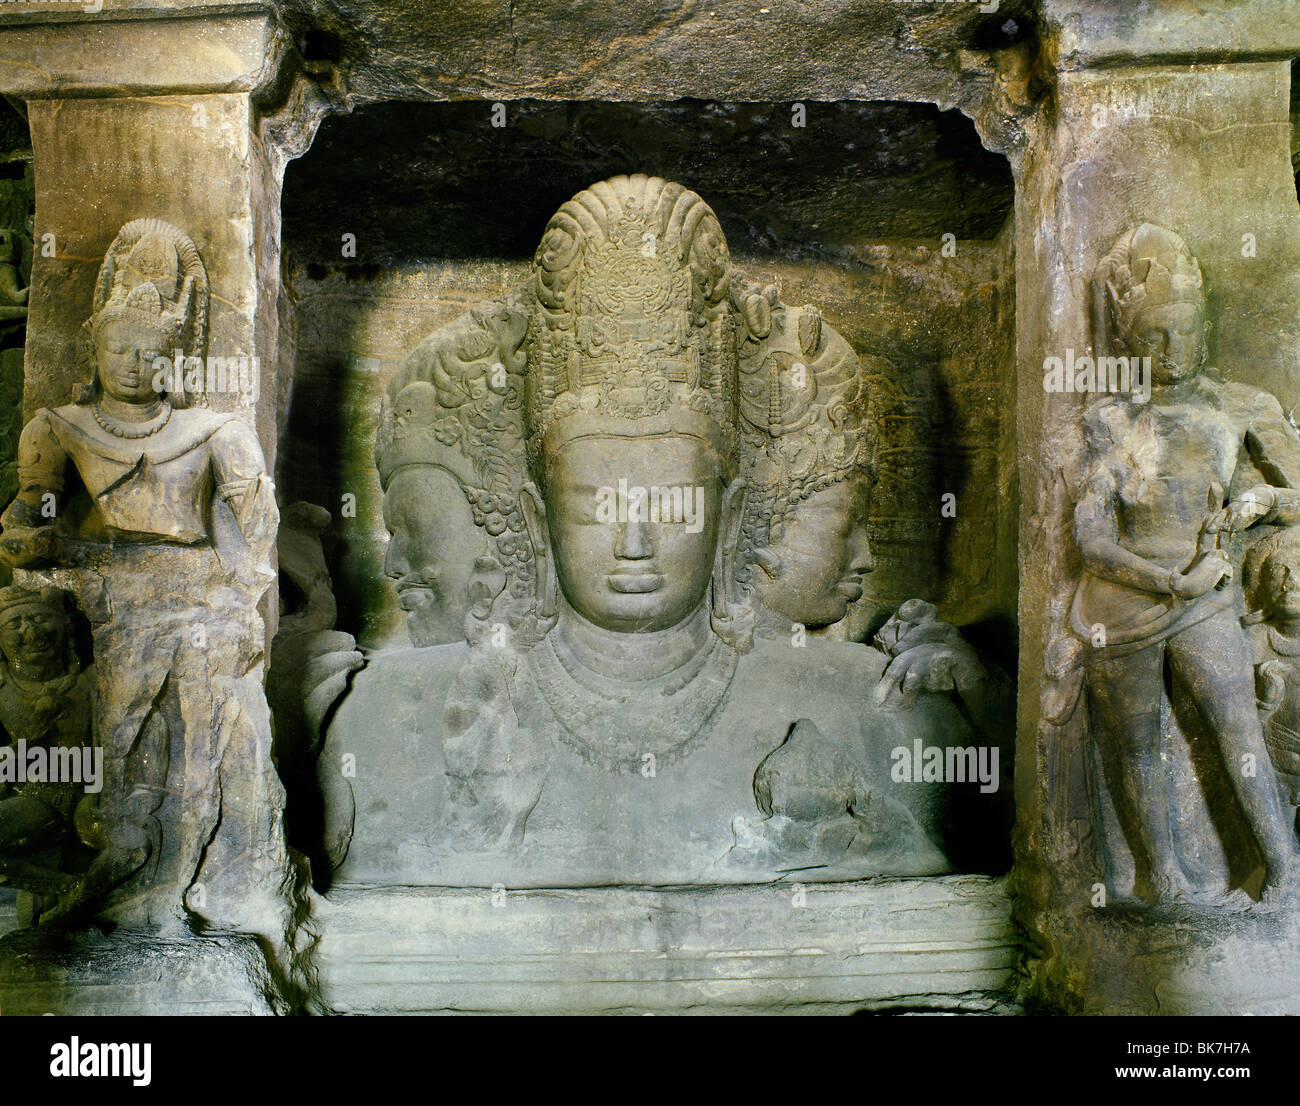 Trimurti, Elephanta cave, late Gupta dating from between the 9th and 11th centuries, UNESCO World Heritage Site, India Stock Photo